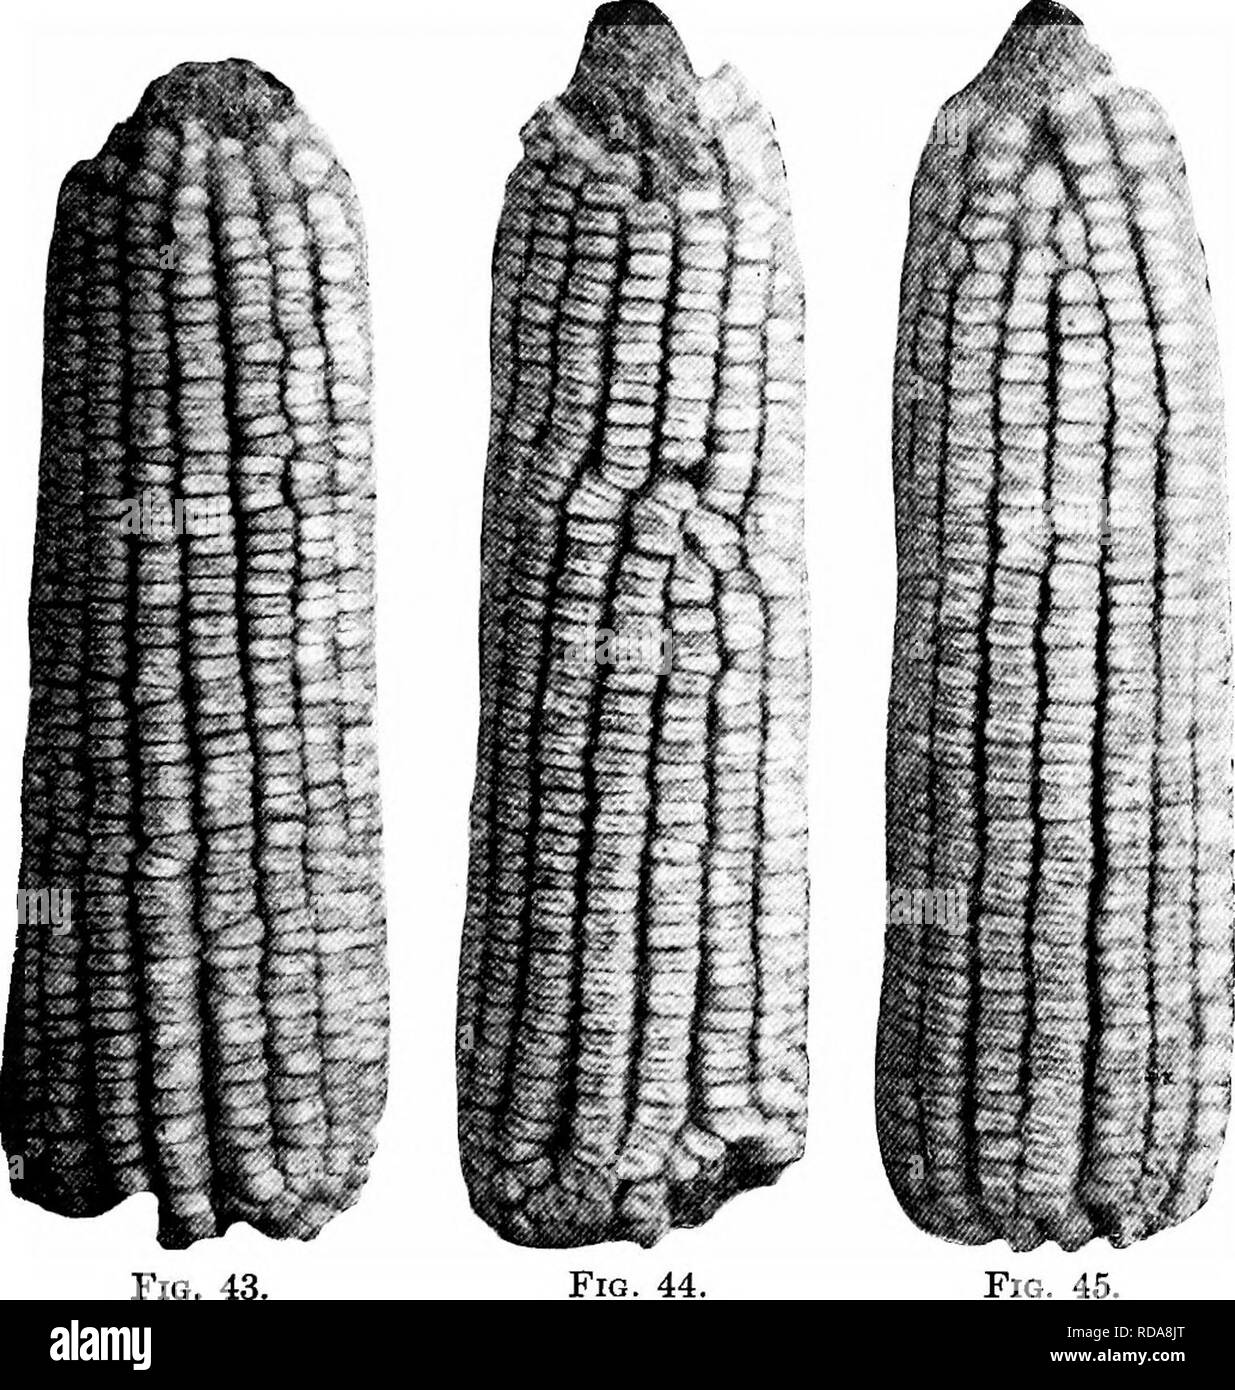 . Southern field crops (exclusive of forage plants). Agriculture. CORN JUDGING 103 chapter, score a number of ears of corn, entering the figures rep- resenting his estimate of each quality in the proper space in a table ruled or printed like the table on page 101. Figs. 40-45 show defective ears of^ Henry Grady corn to be criticized by the pupil.. The following paragraphs indicate some of the most important considerations in scoring each character: — (1) Unipormitt. — The ear examined should be Uke other ears of the same variety, and all ears of one exhibit should be uniform in size and appear Stock Photo